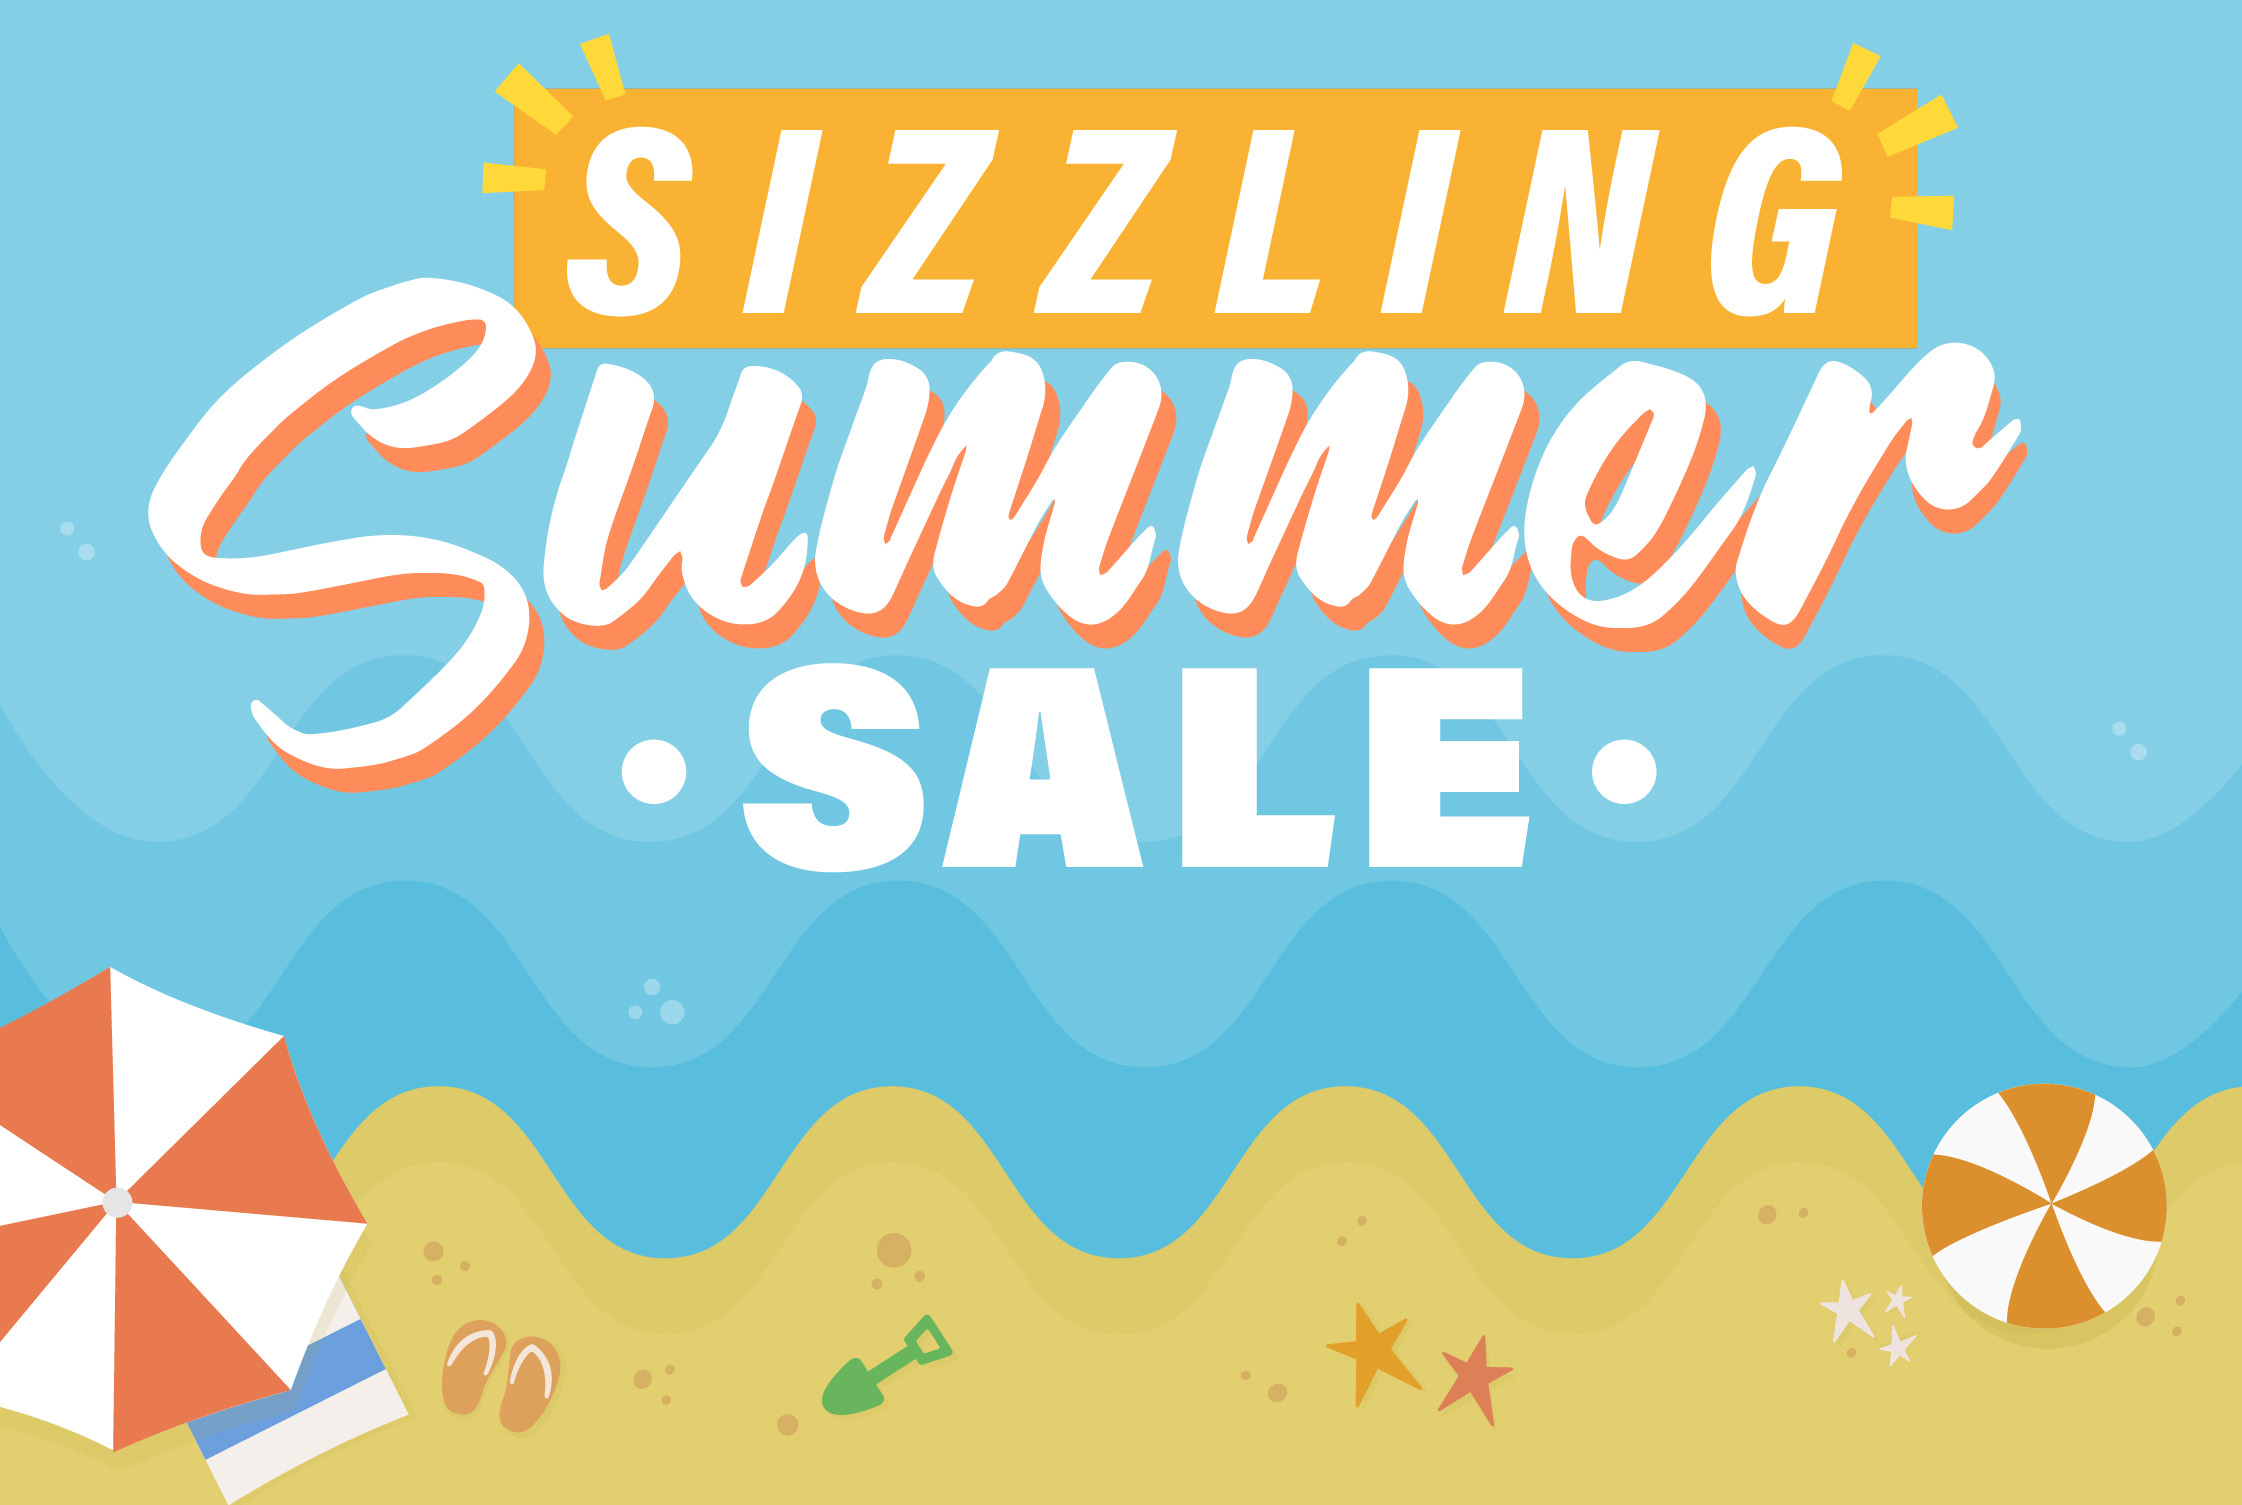 Take advantage of our sizzling summer sale! Packer